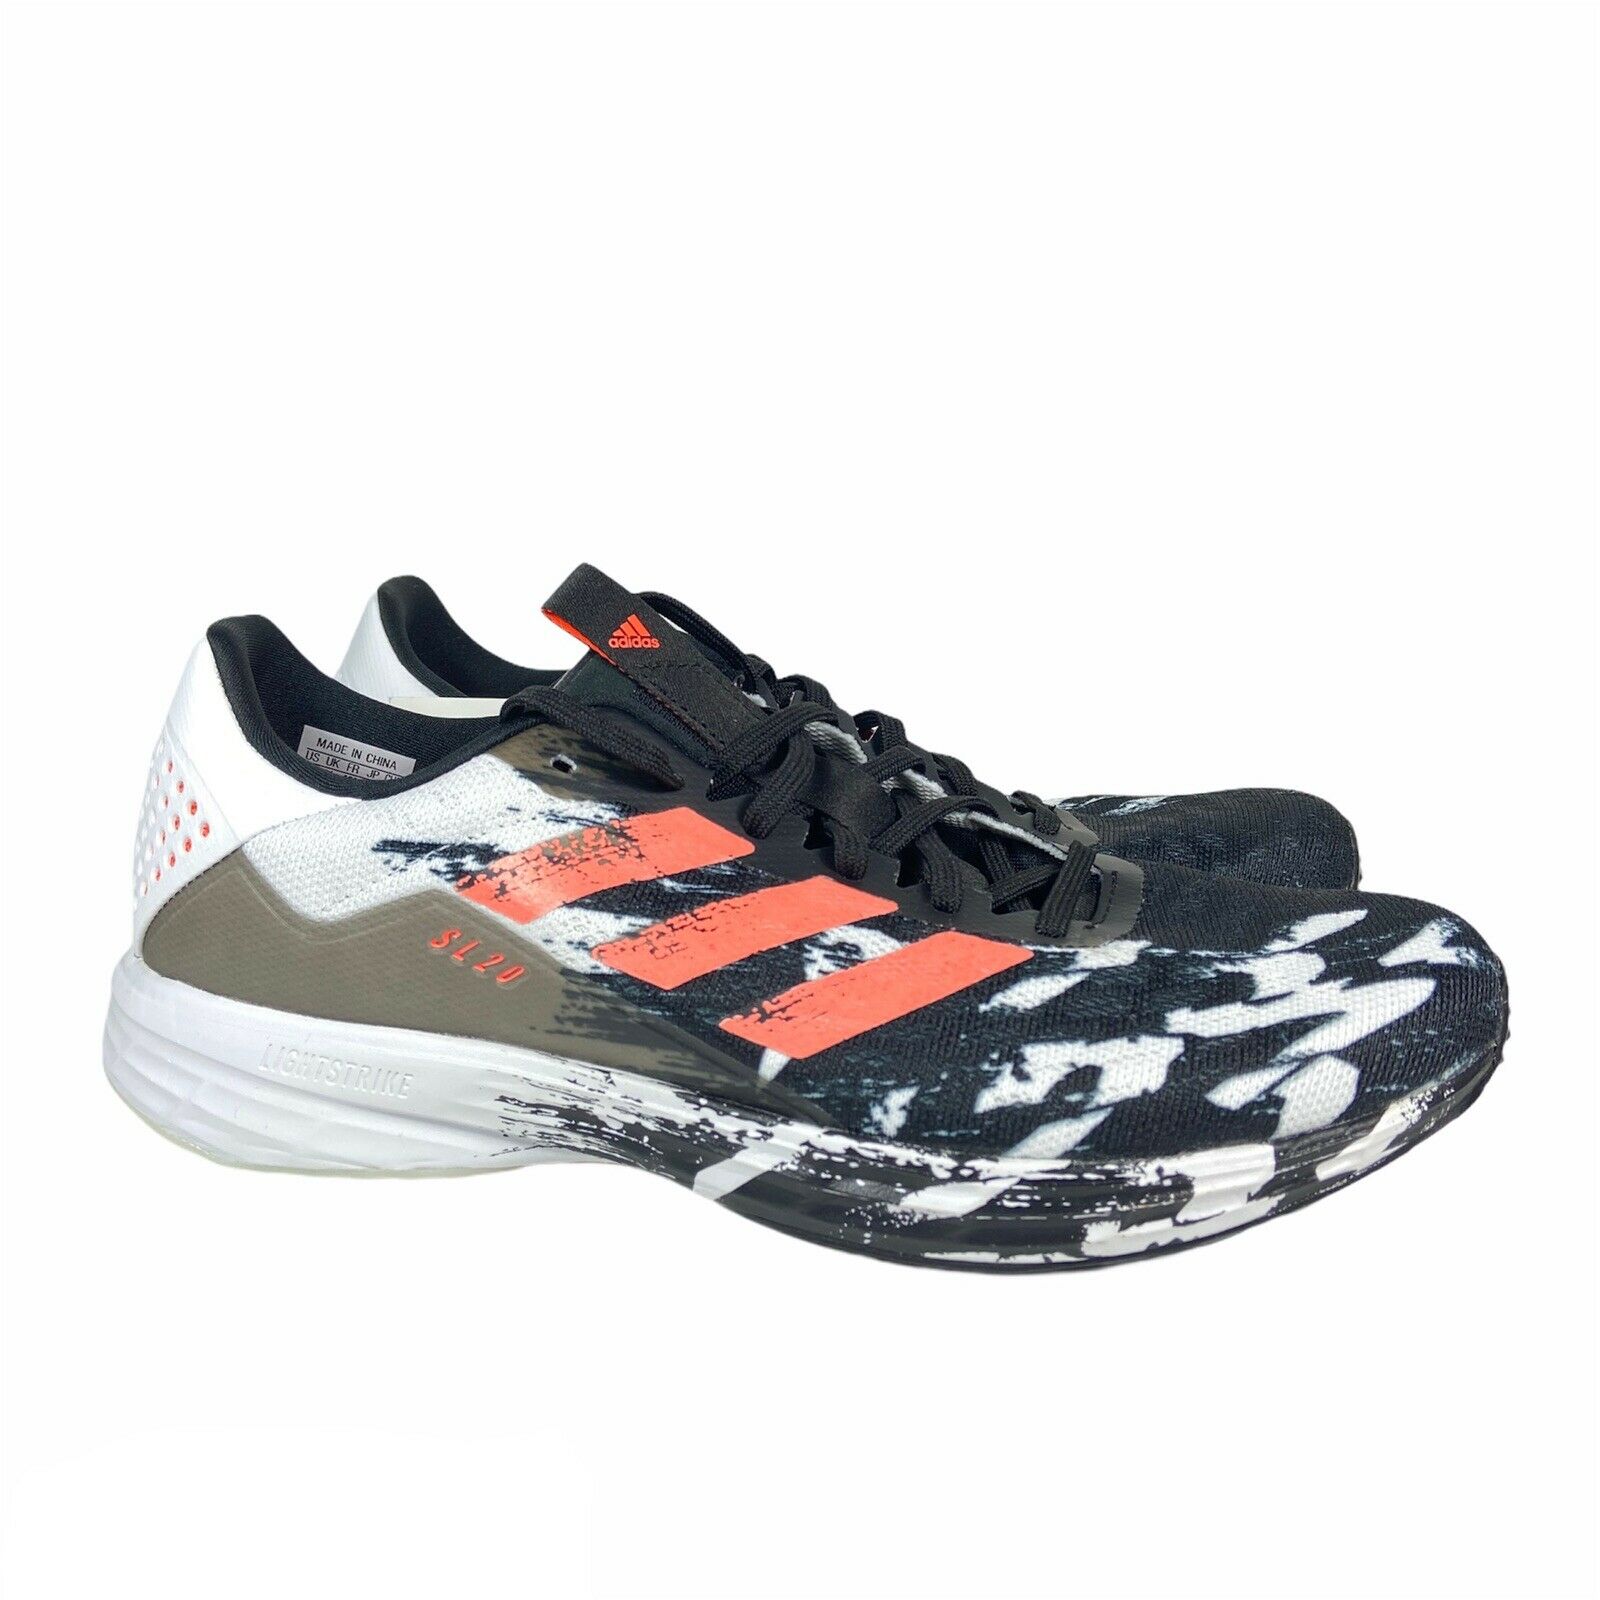 Adidas SL20 Japanese Calligraphy Running Shoes Black Coral White EF0804 Mens 9